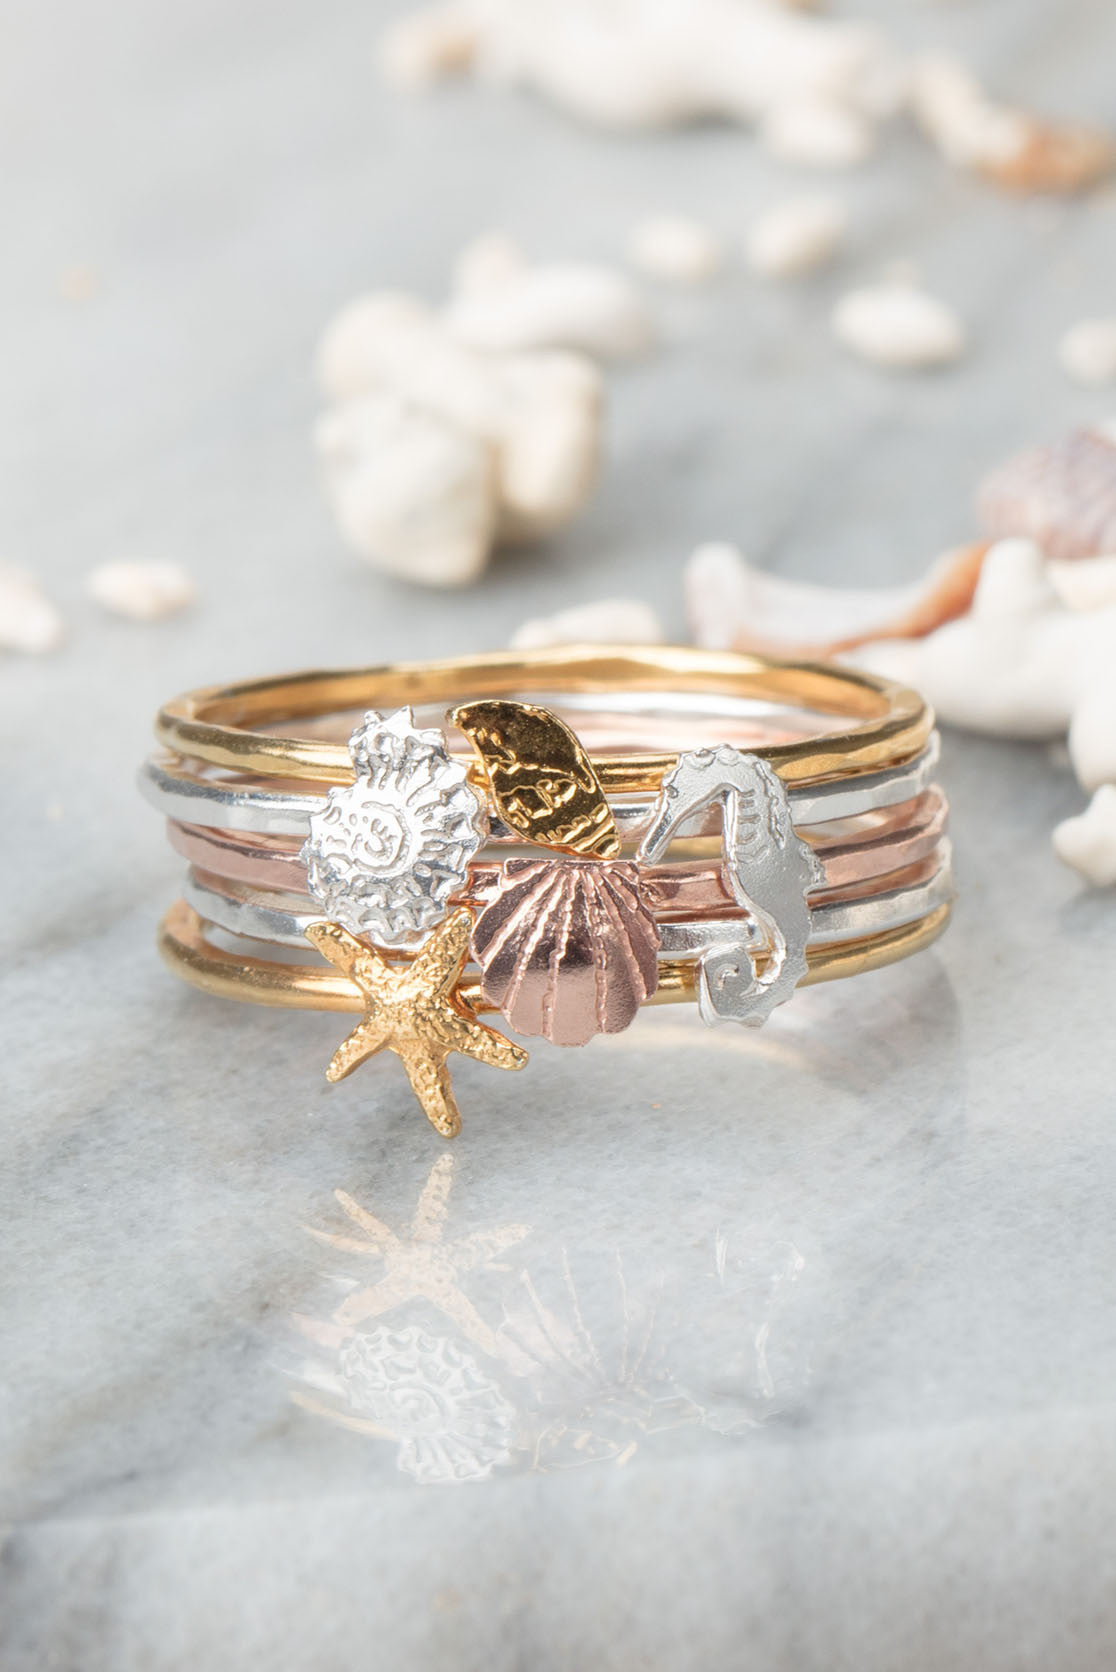 Handmade stacked ring with sea creatures